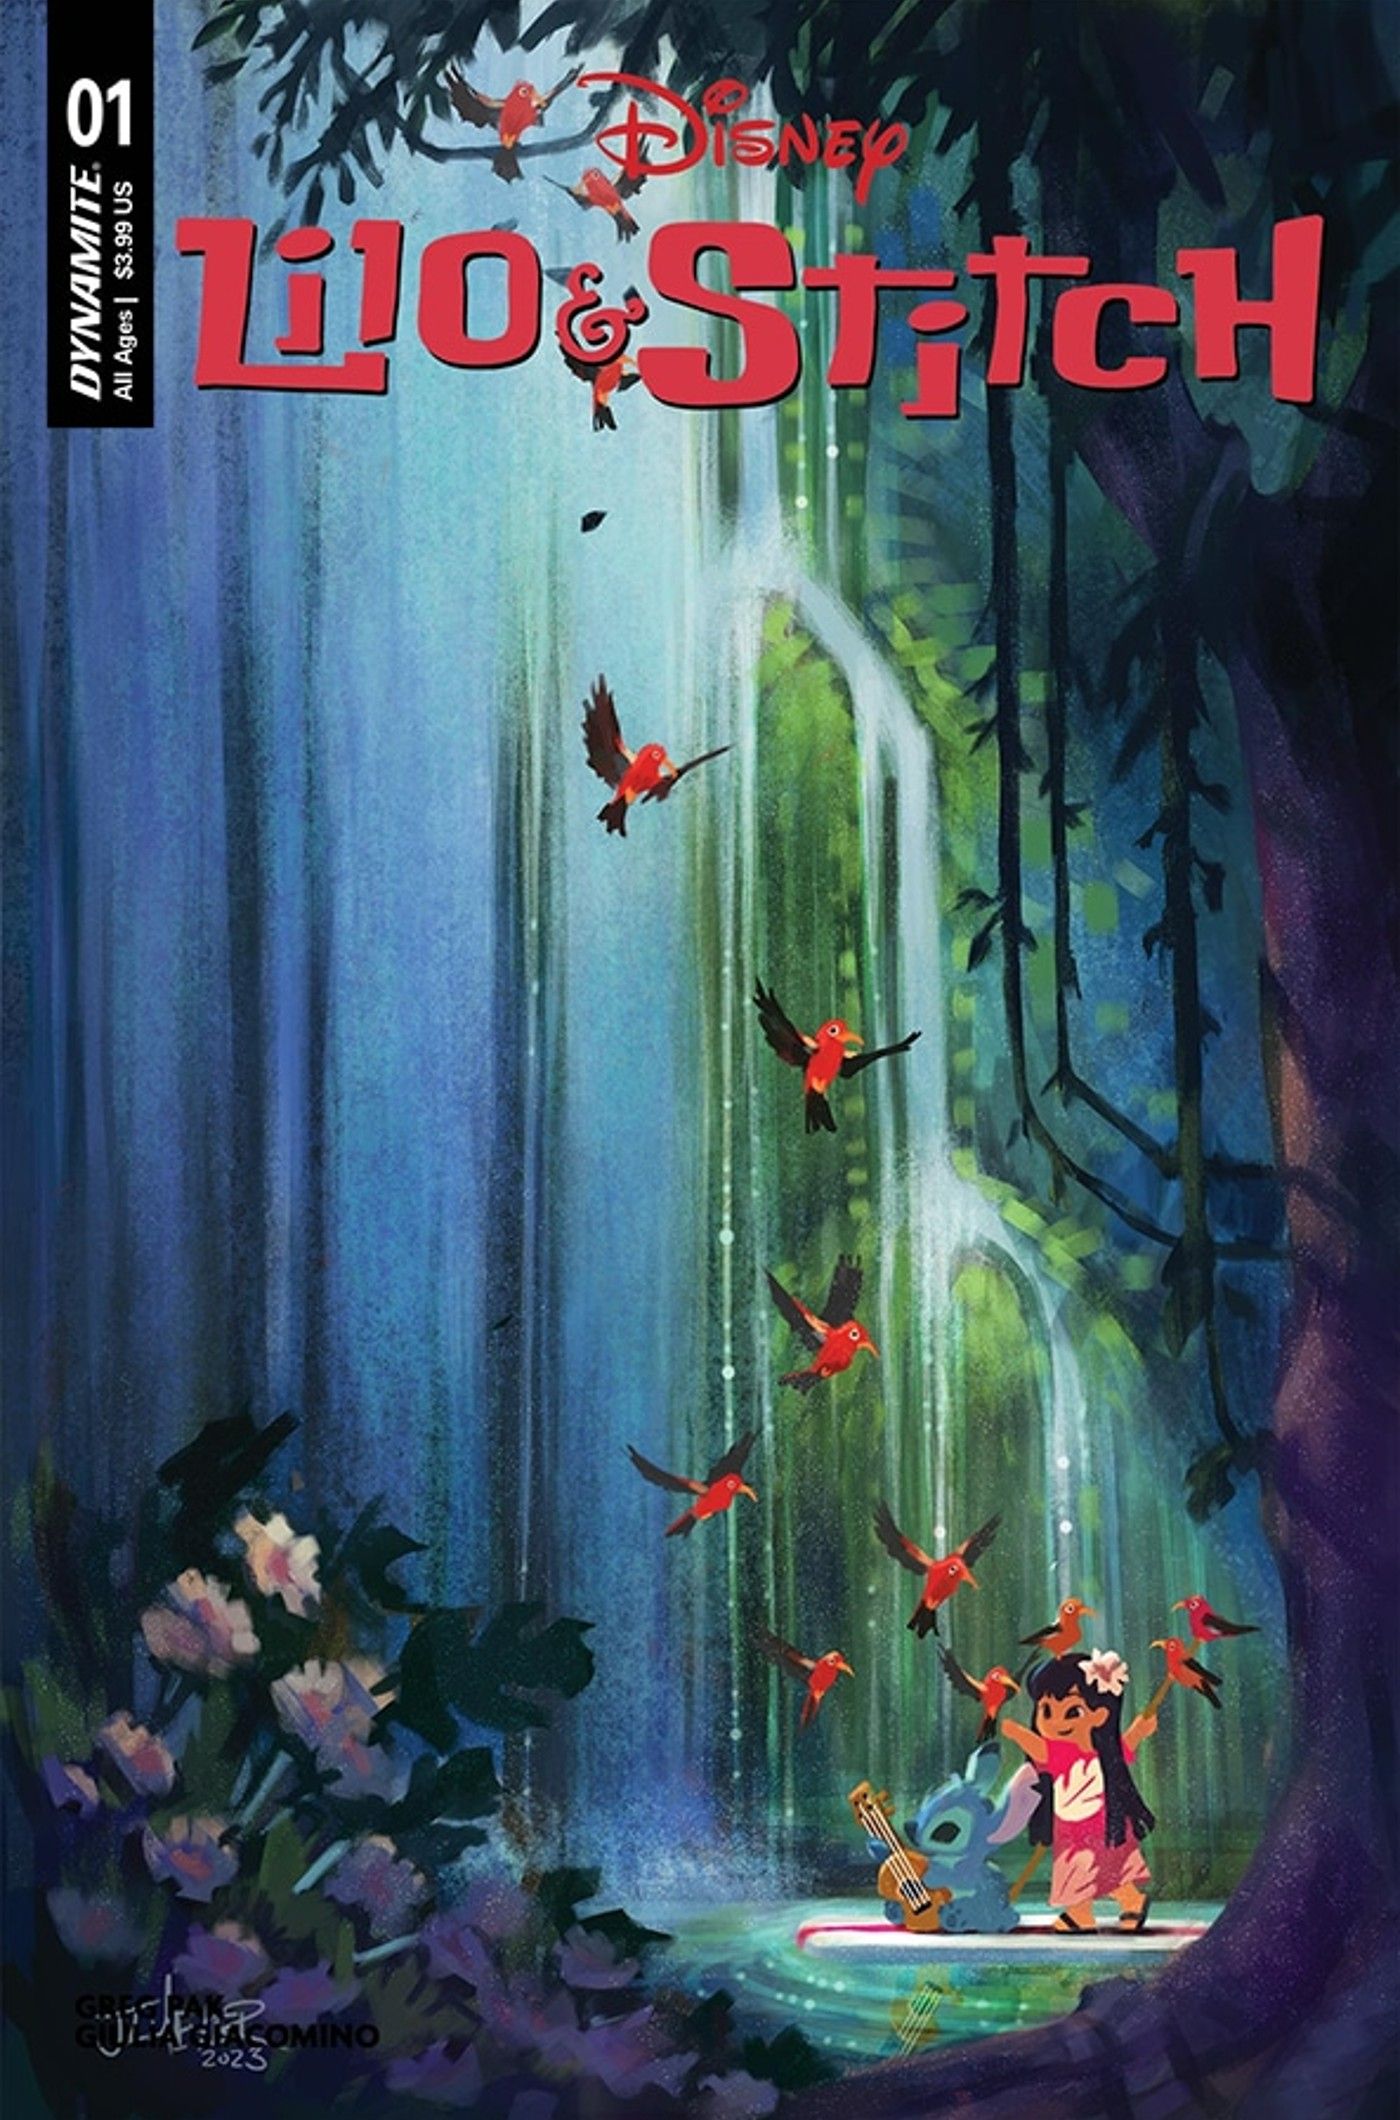 over of Lilo & Stitch #1 by Jennifer L. Meyer featuring the pair under a waterfall